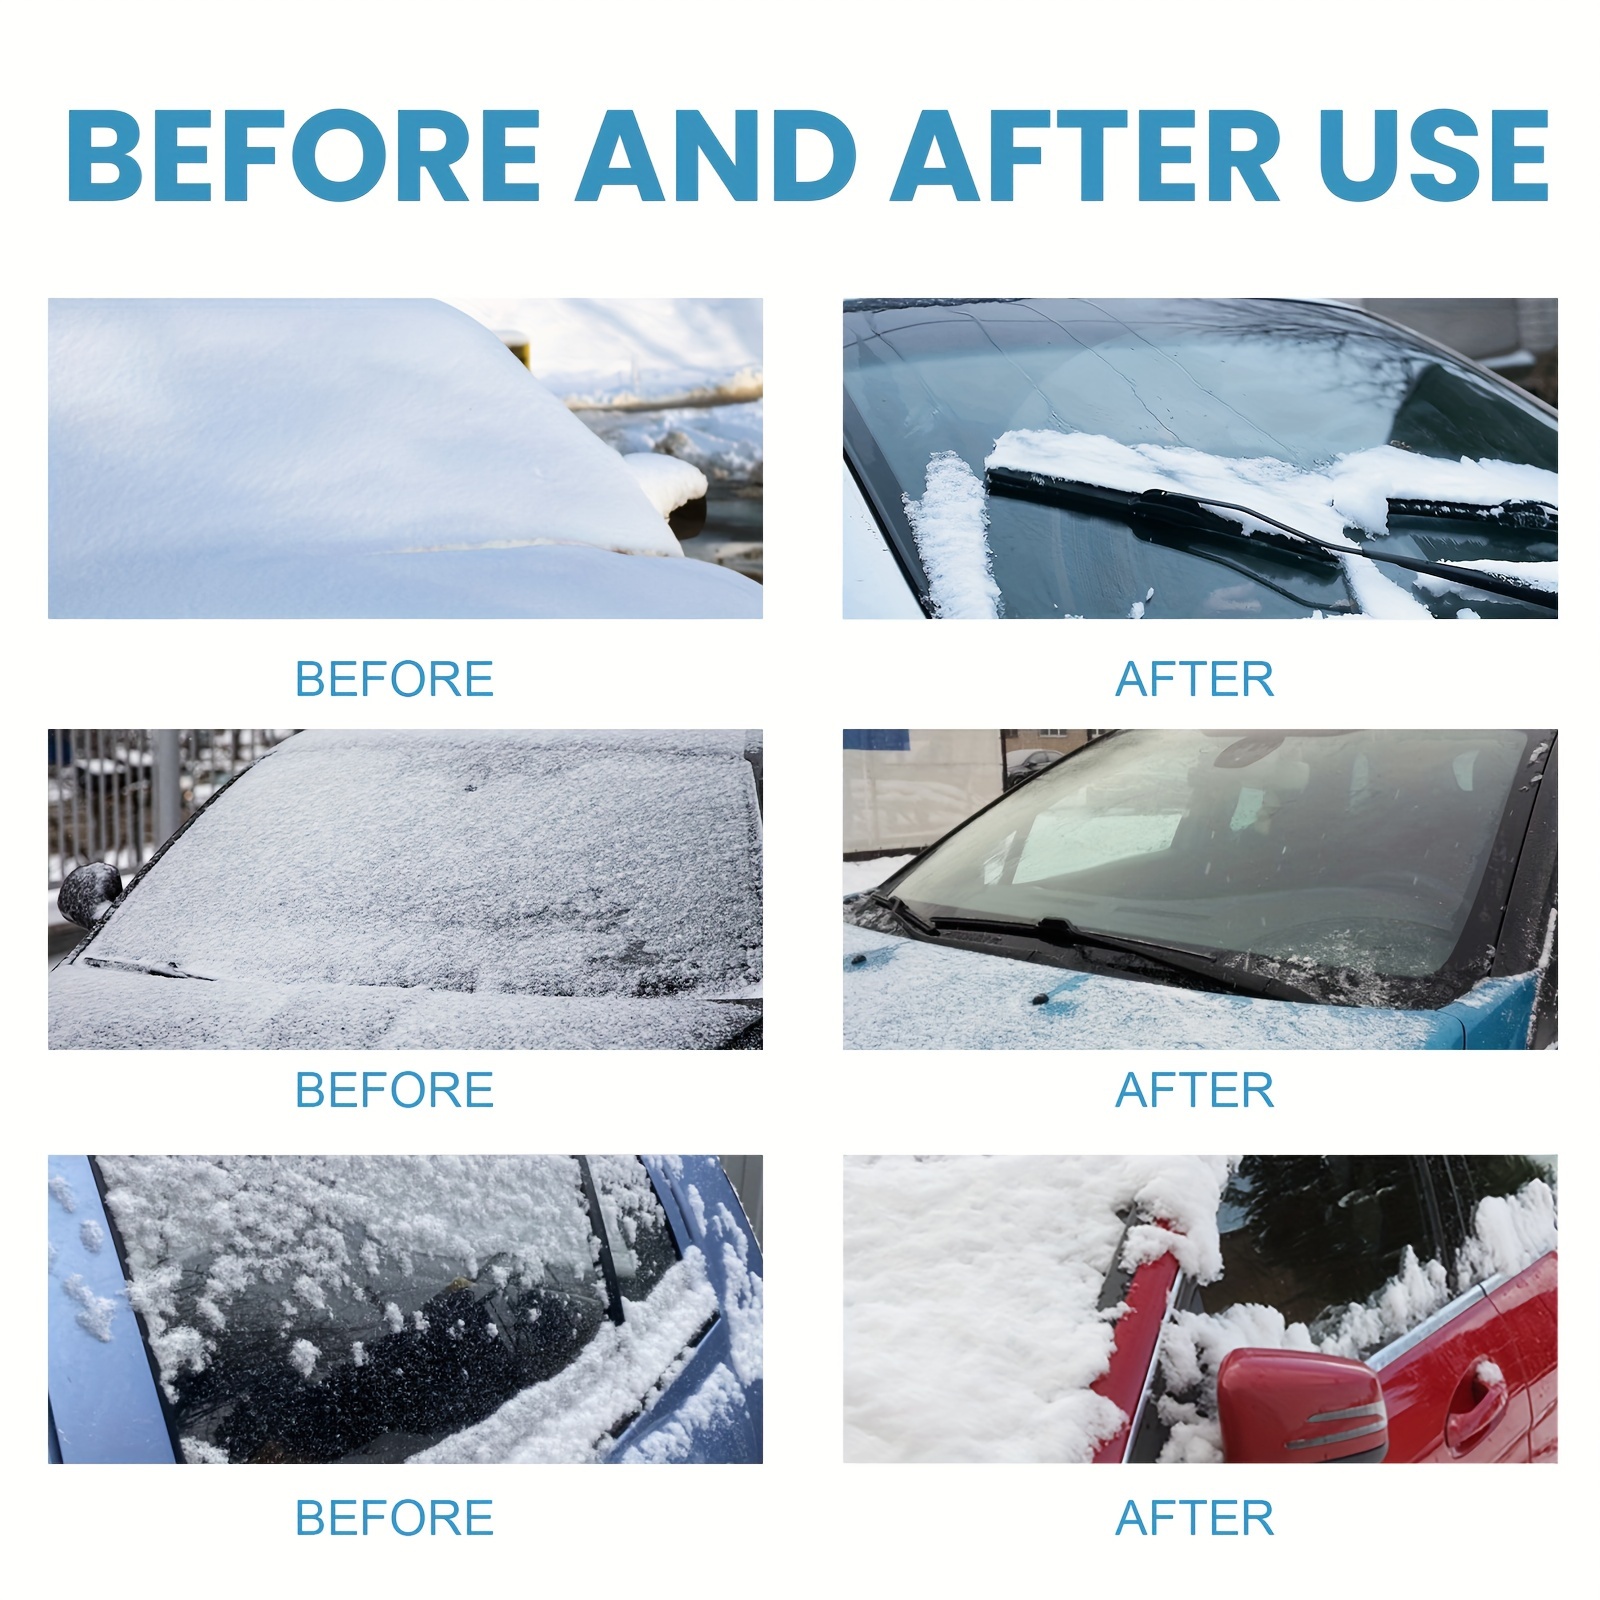 Ice-Off Windshield Spray 60ml Powerful Snow And Frost Remover